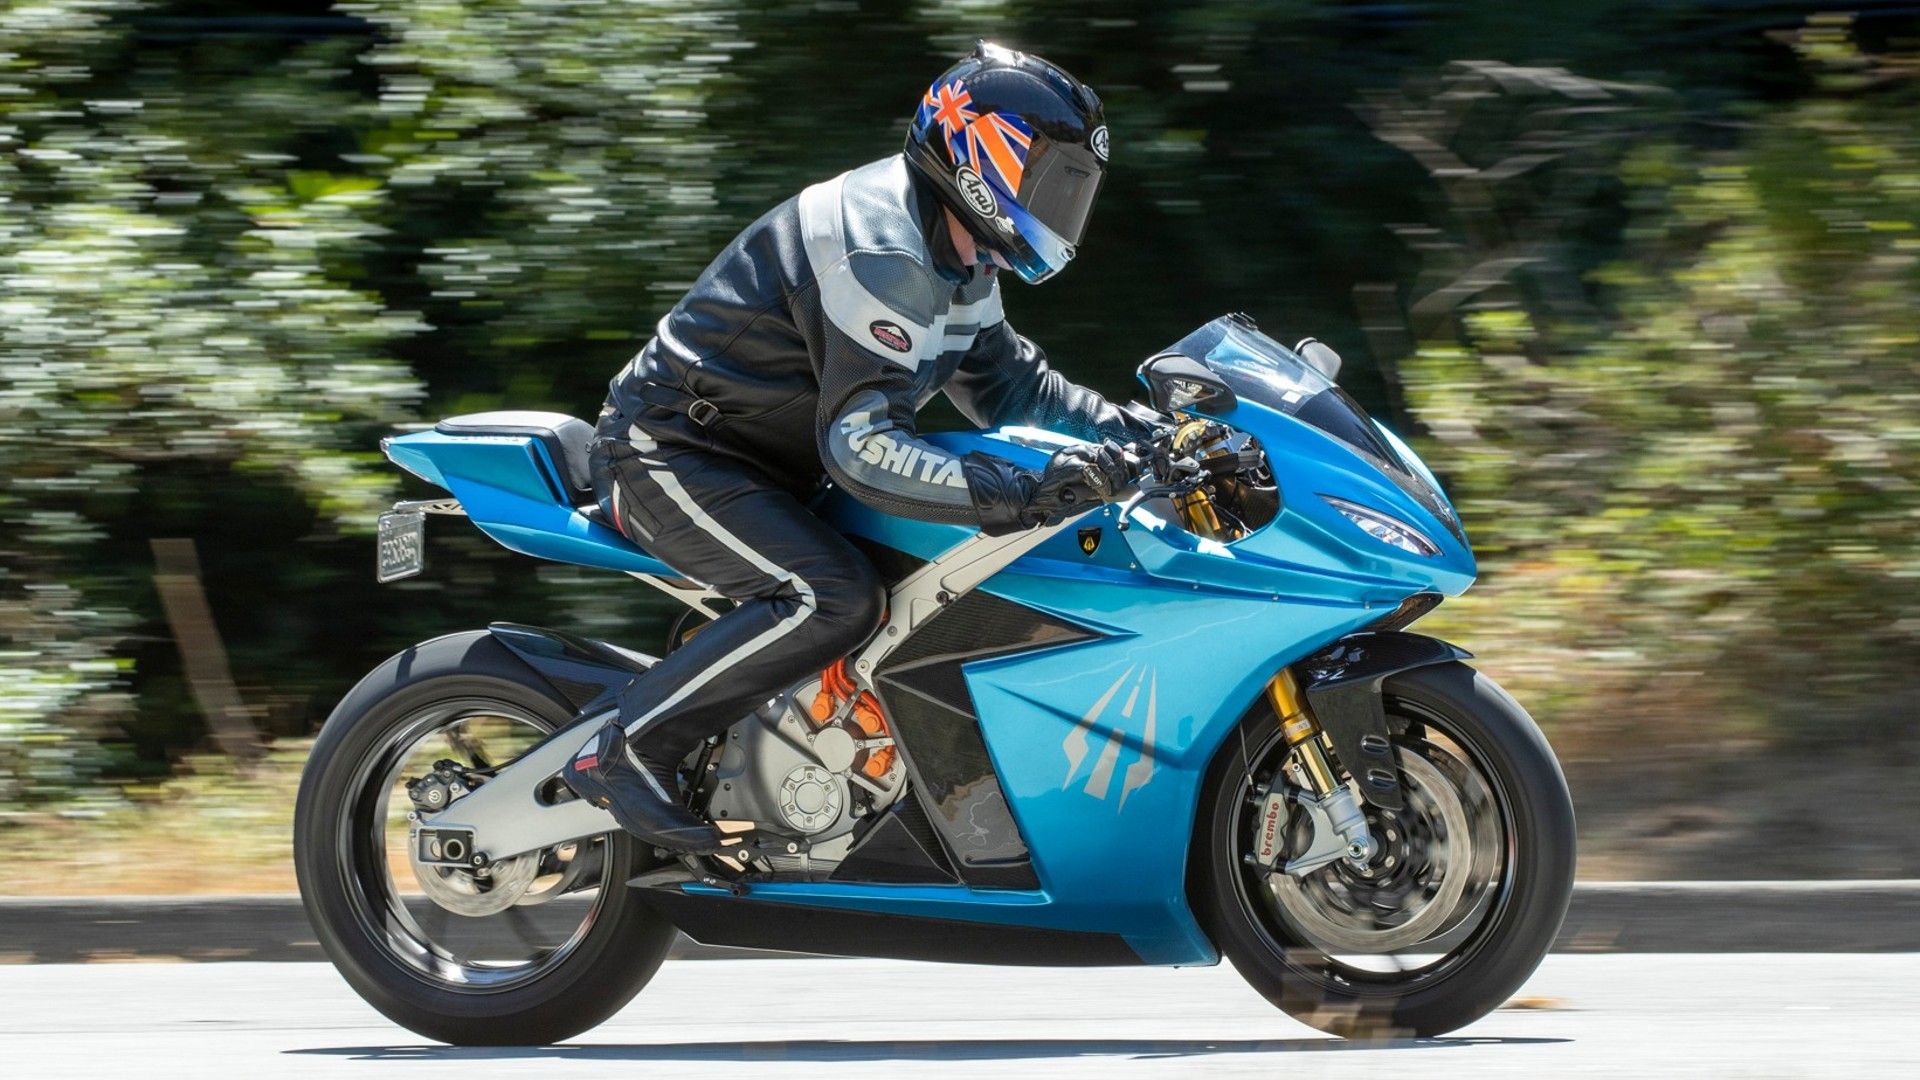 key things you should know before riding a 200-hp superbike